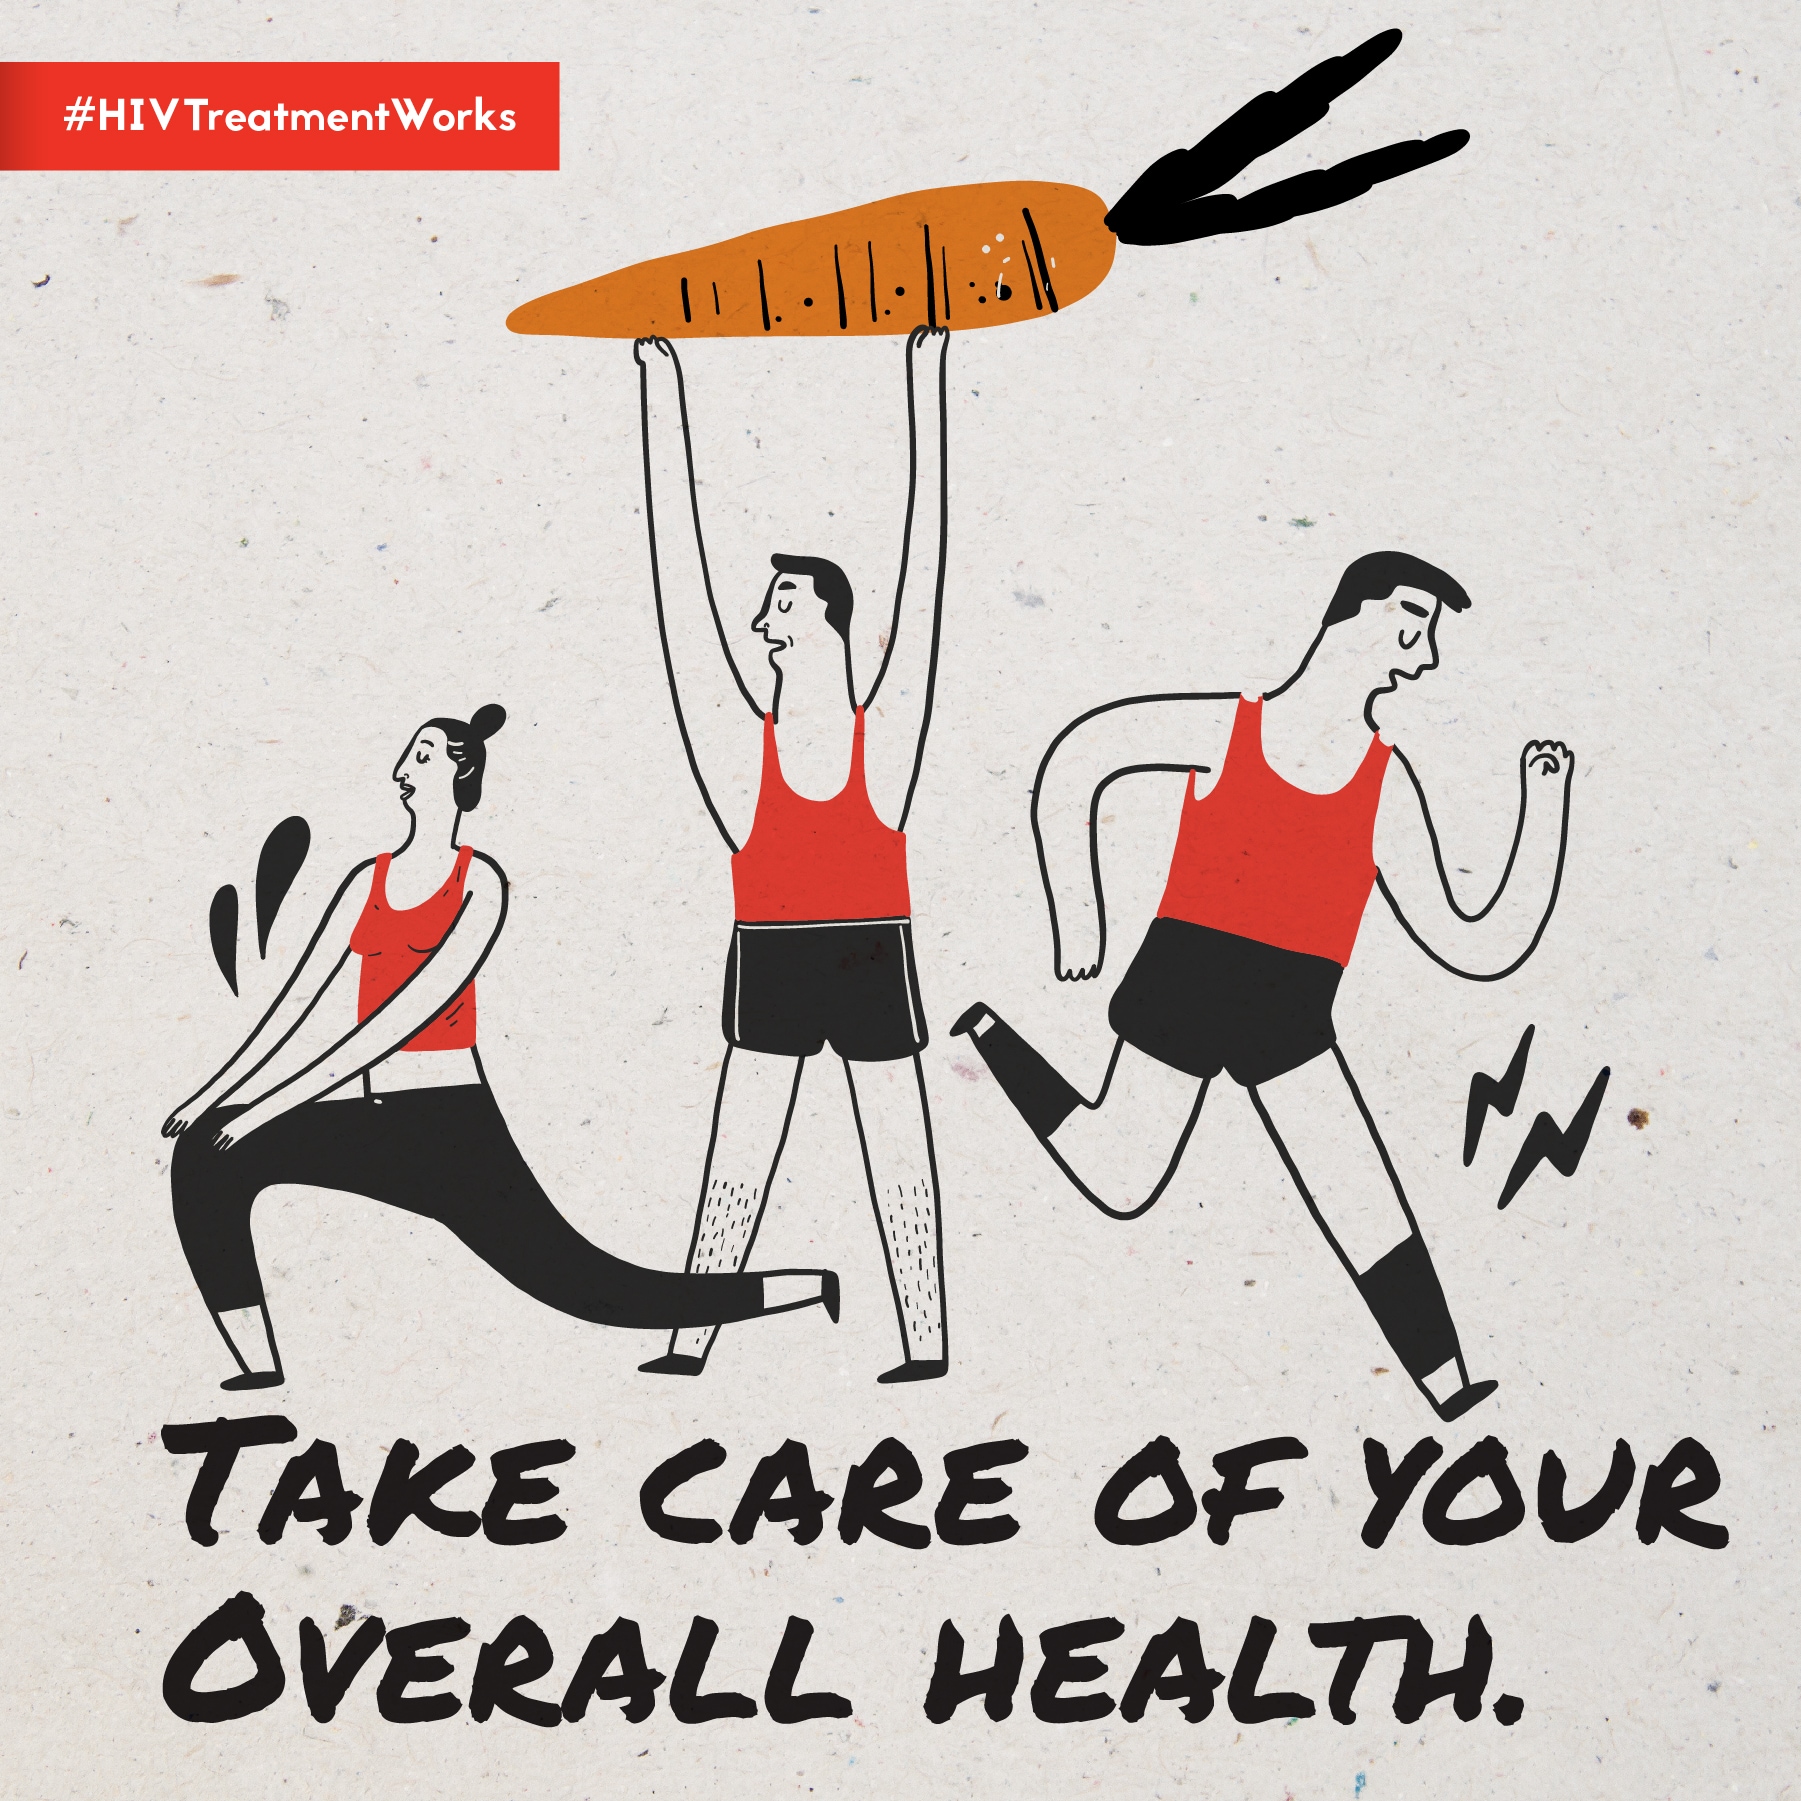 Image displays animation of three figures exercising, along with the following text: TAKE CARE OF YOUR OVERALL HEALTH.